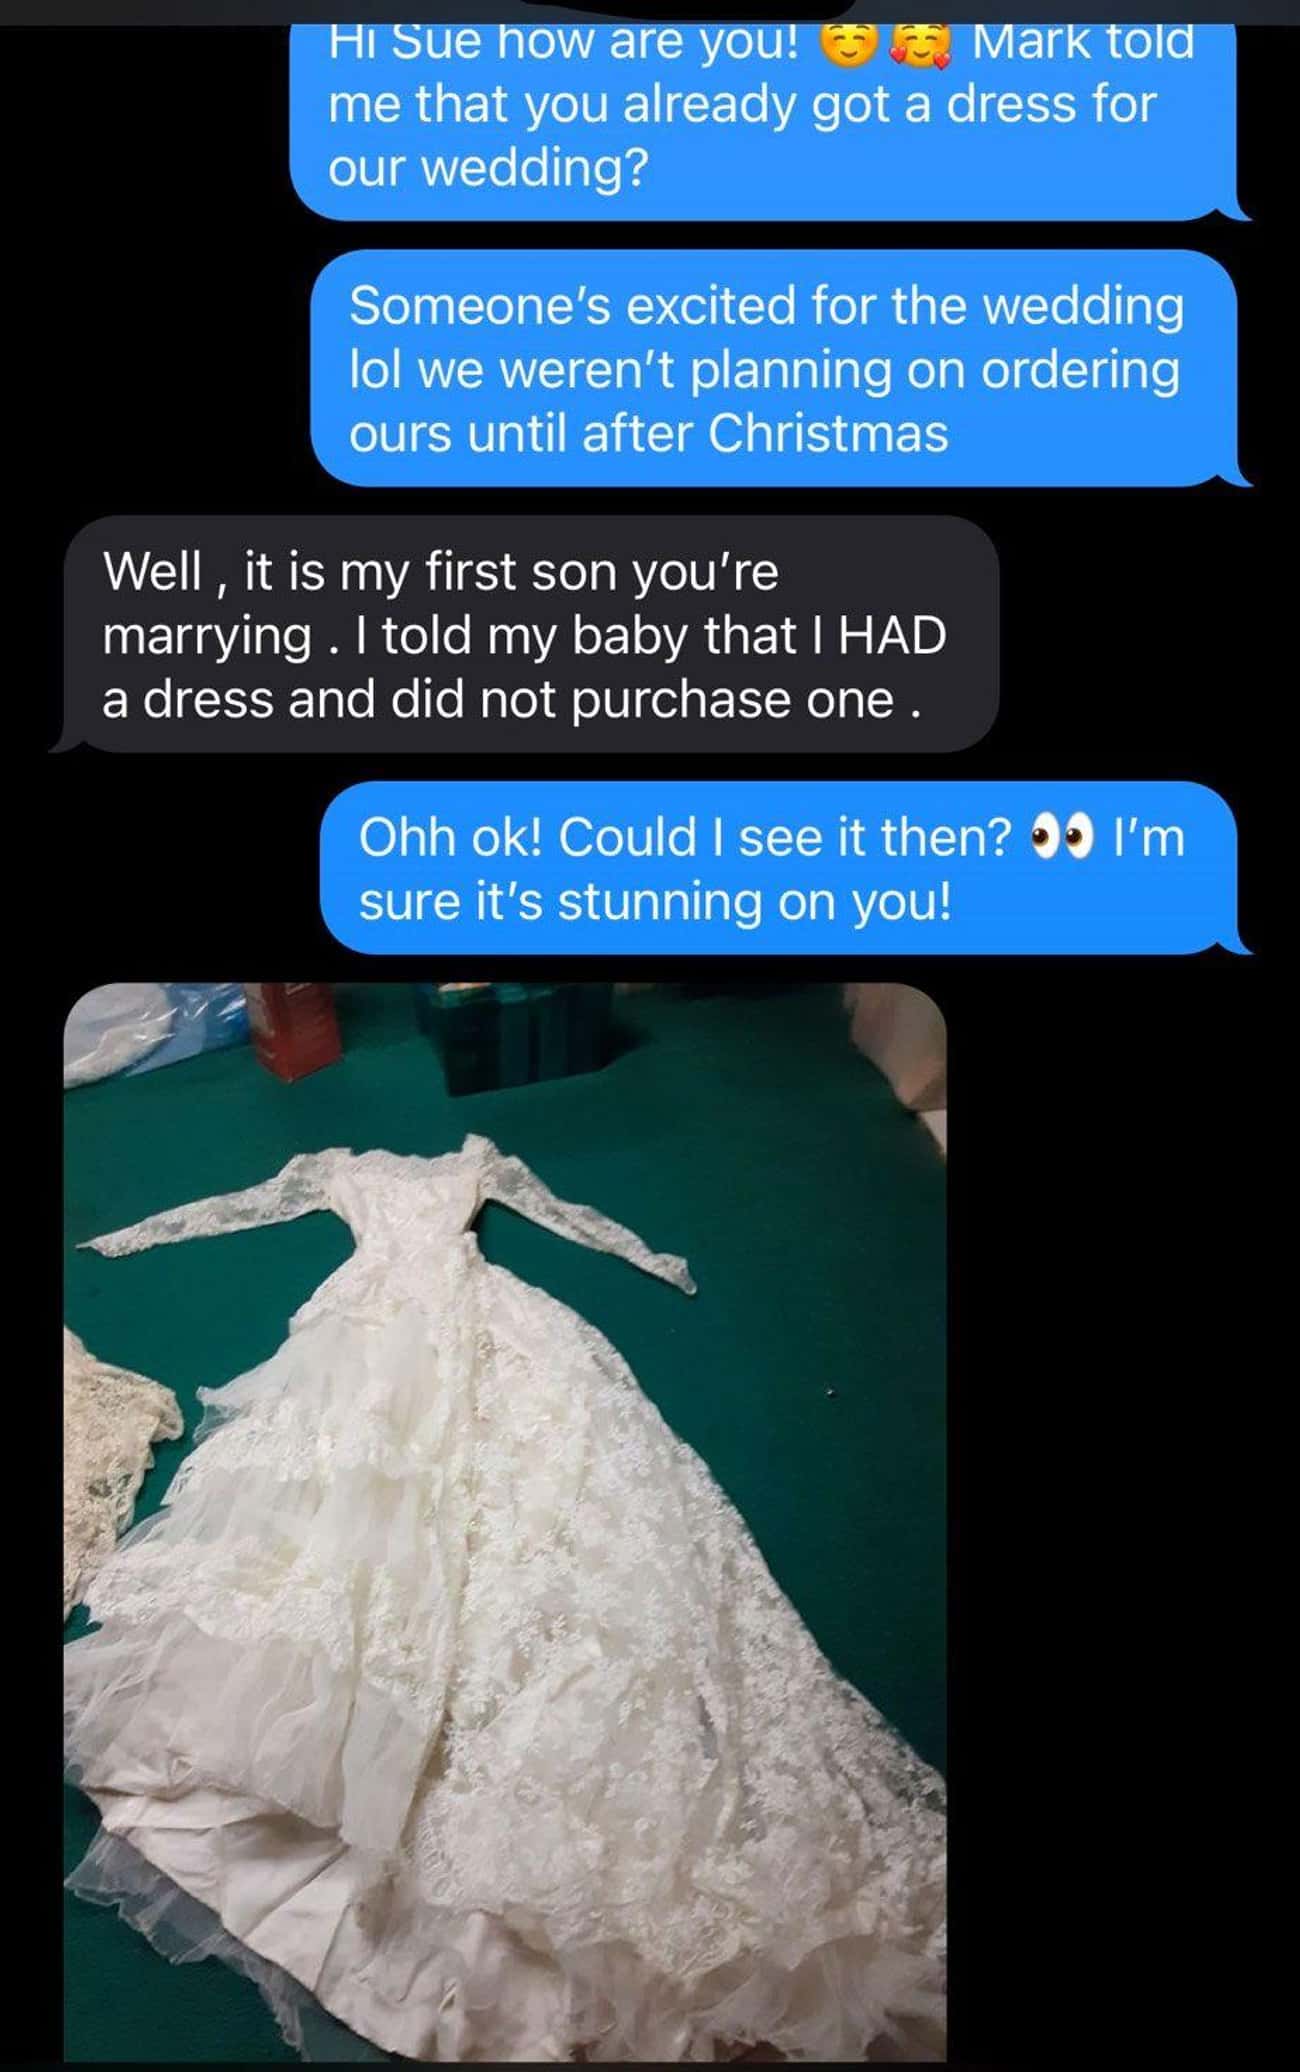 The Bride Reached Out To Her Future Mother-In-Law About Her Dress